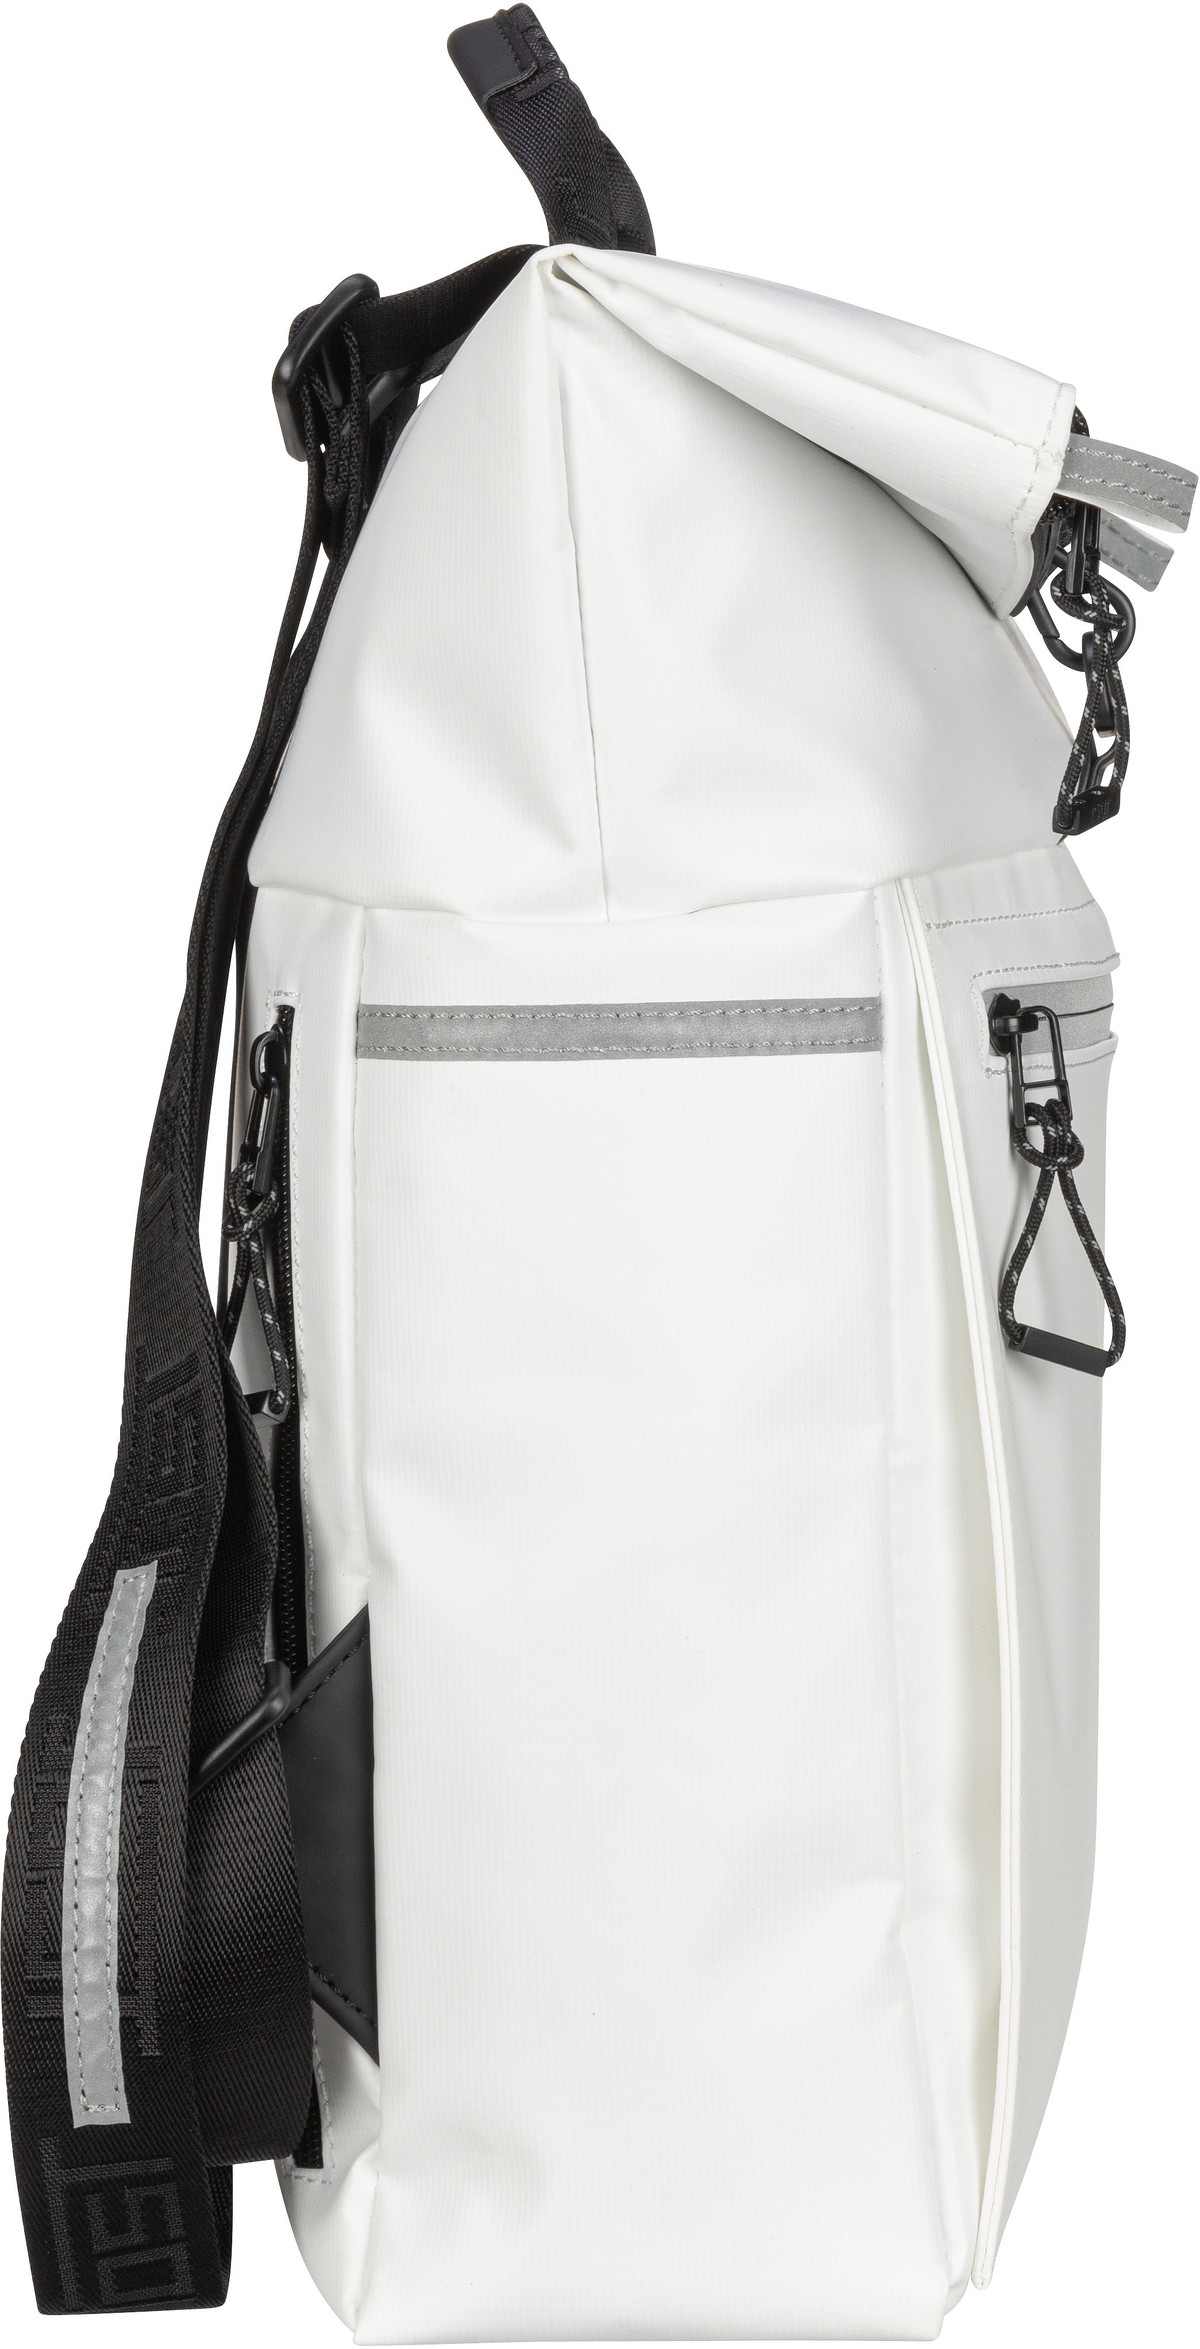 Jost Tolja Cyclist Backpack Courier S - Offwhite